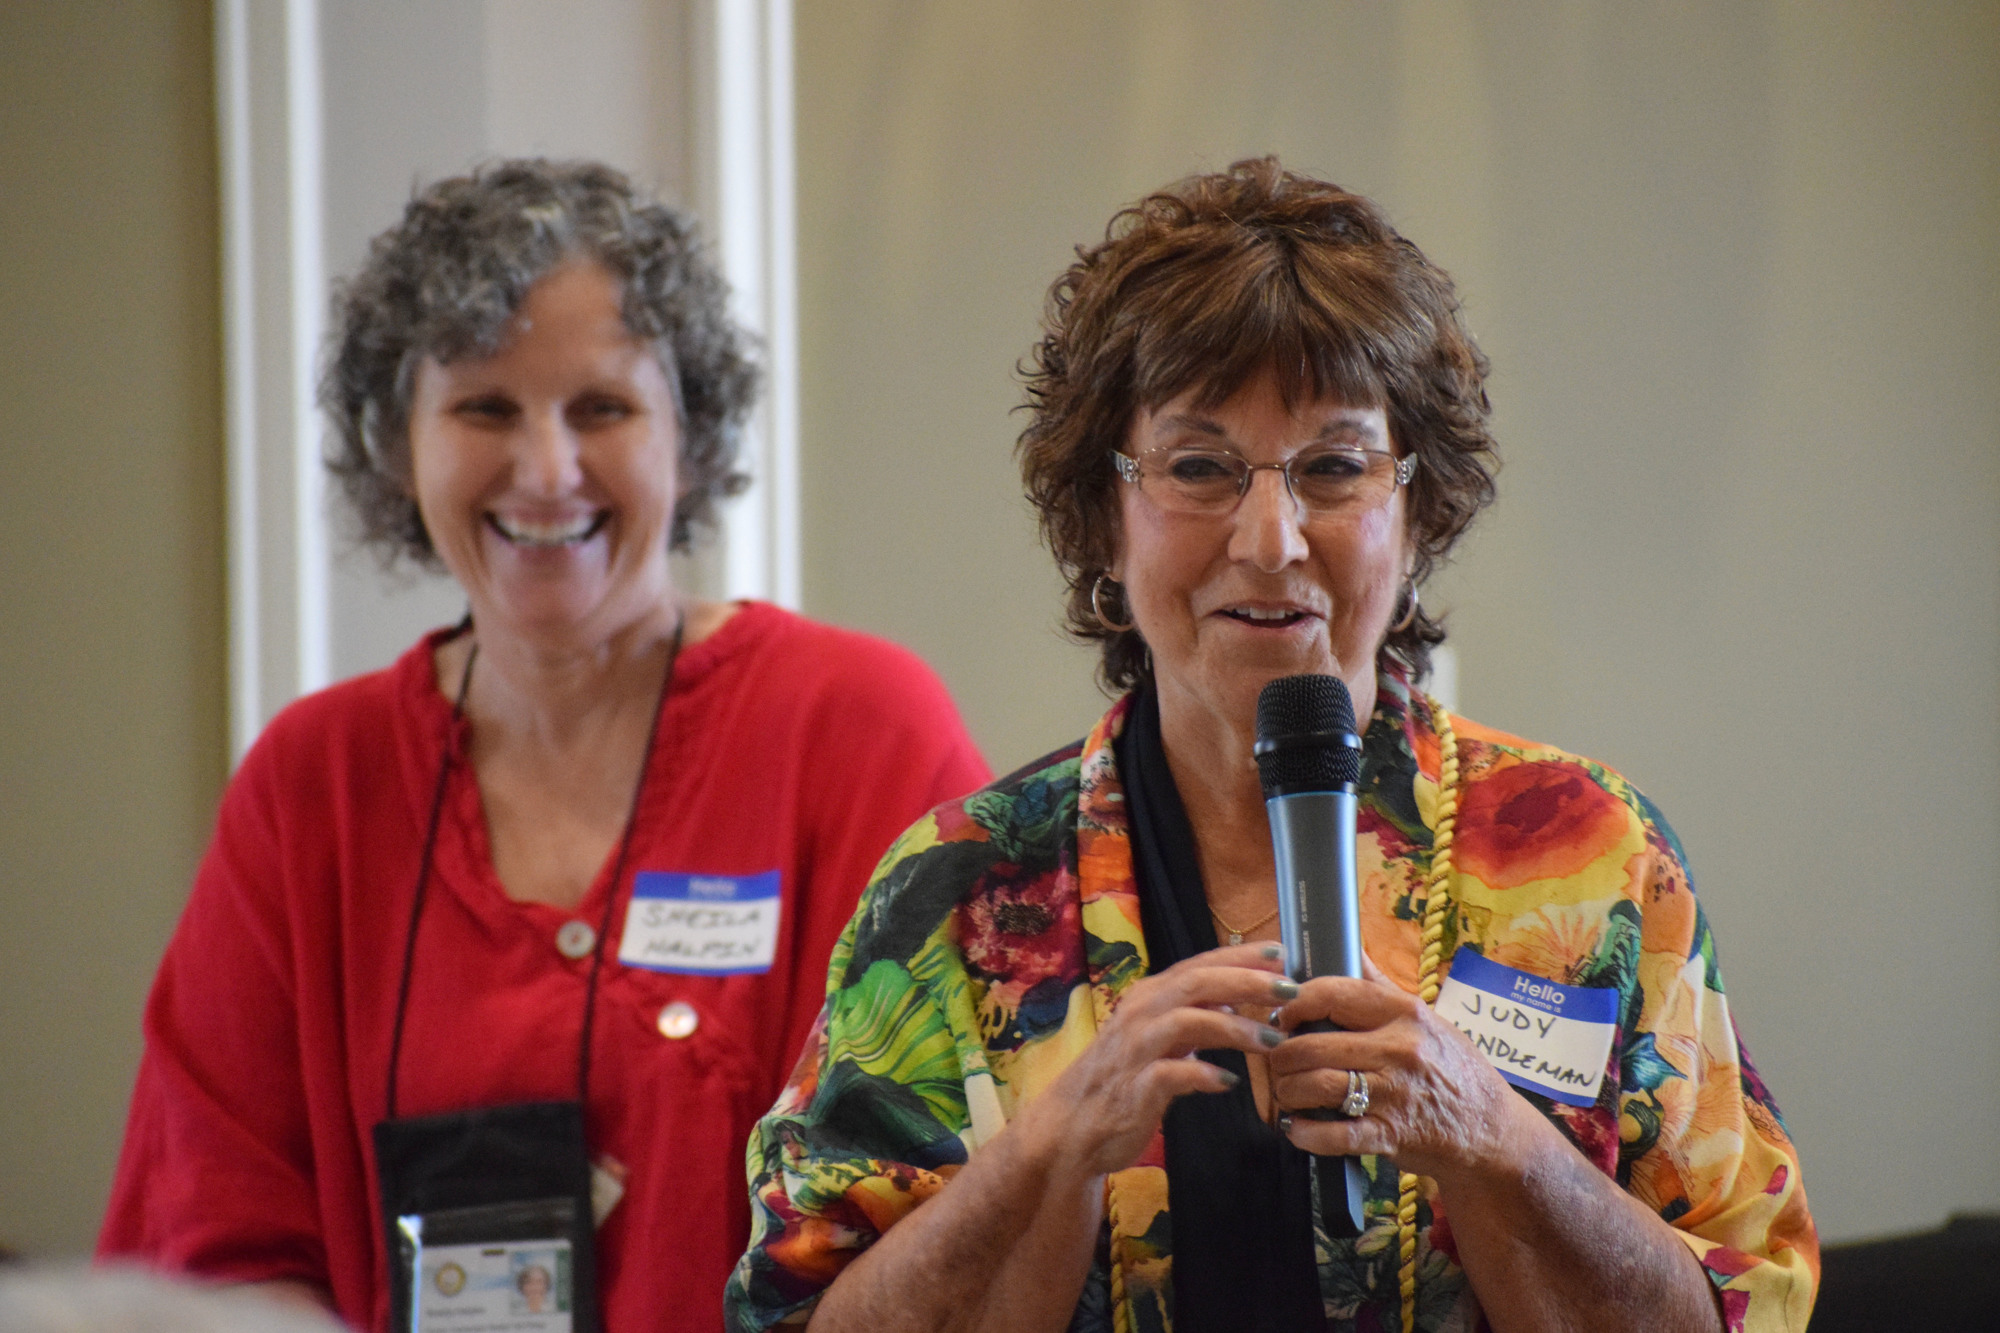 Sheila Halpin, the volunteer programs coordinator for the School District of Manatee County, smiles as Books for Kids volunteer Judy Handleman shares her experiences volunteering for a virtual program.